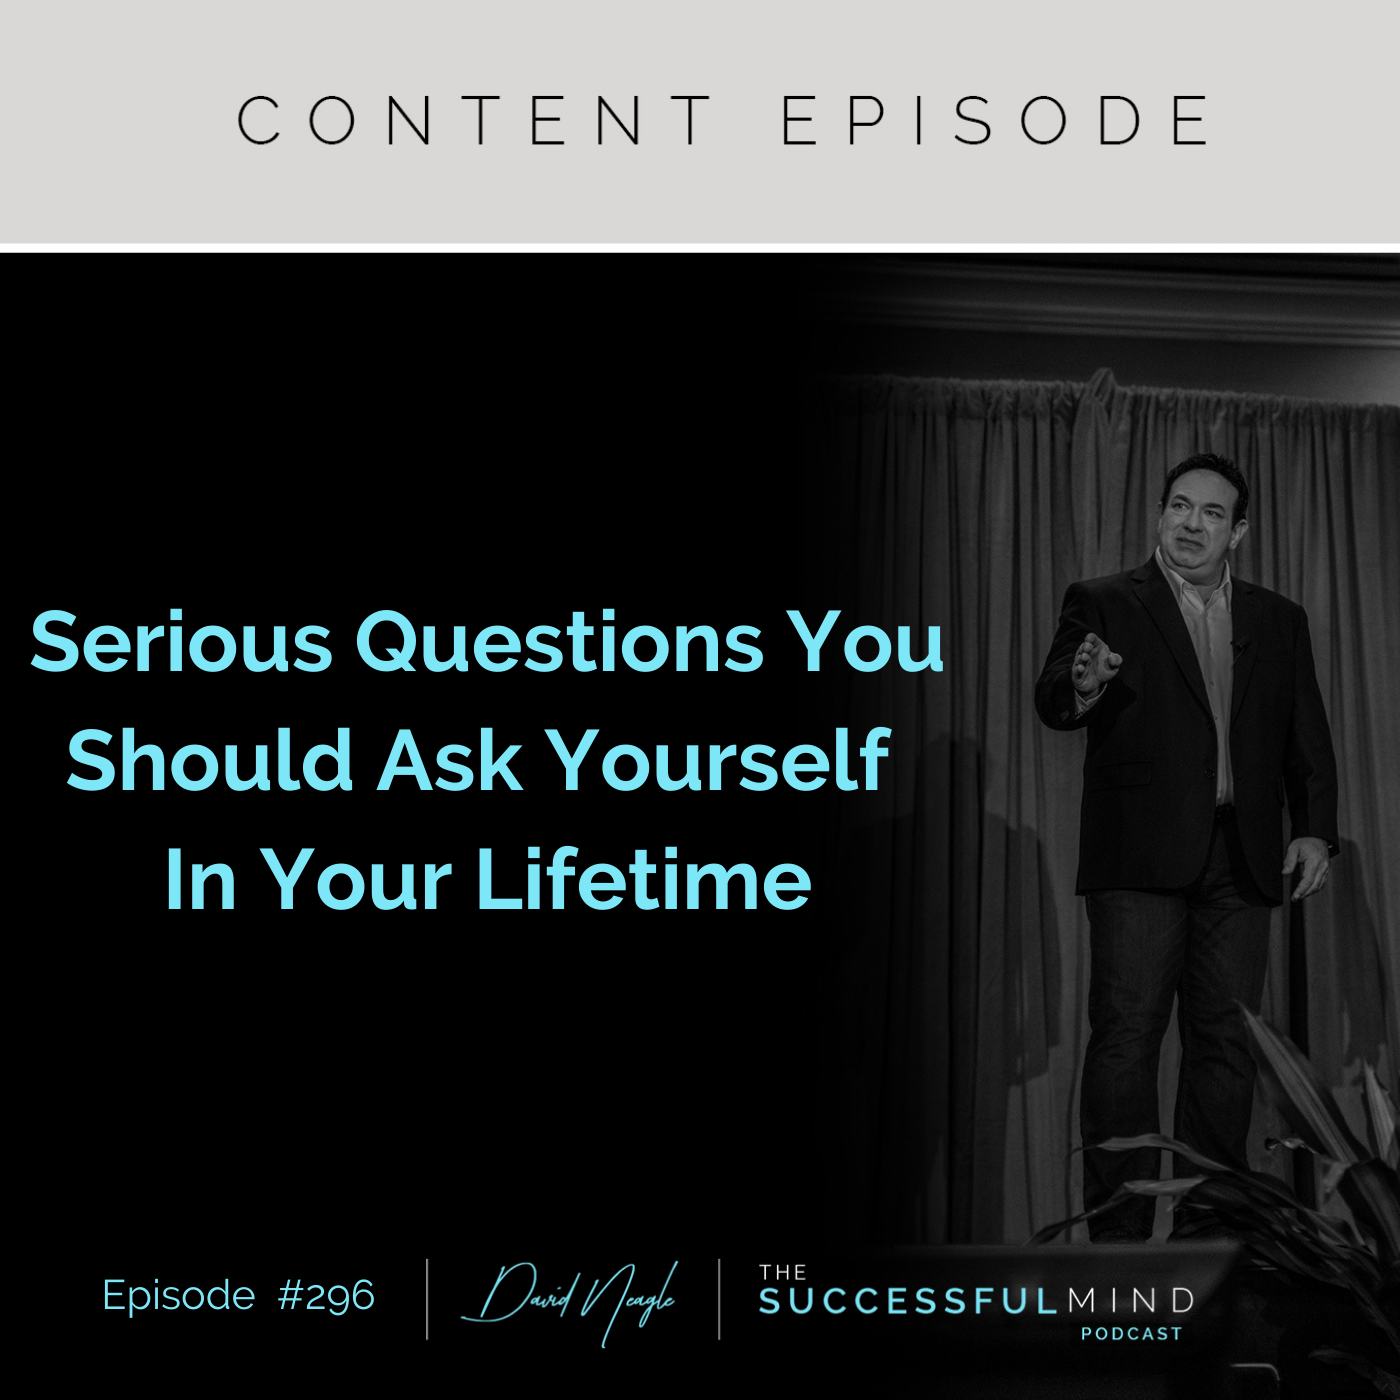 The Successful Mind Podcast - Episode 296 - Serious Questions You Should Ask Yourself In Your Lifetime